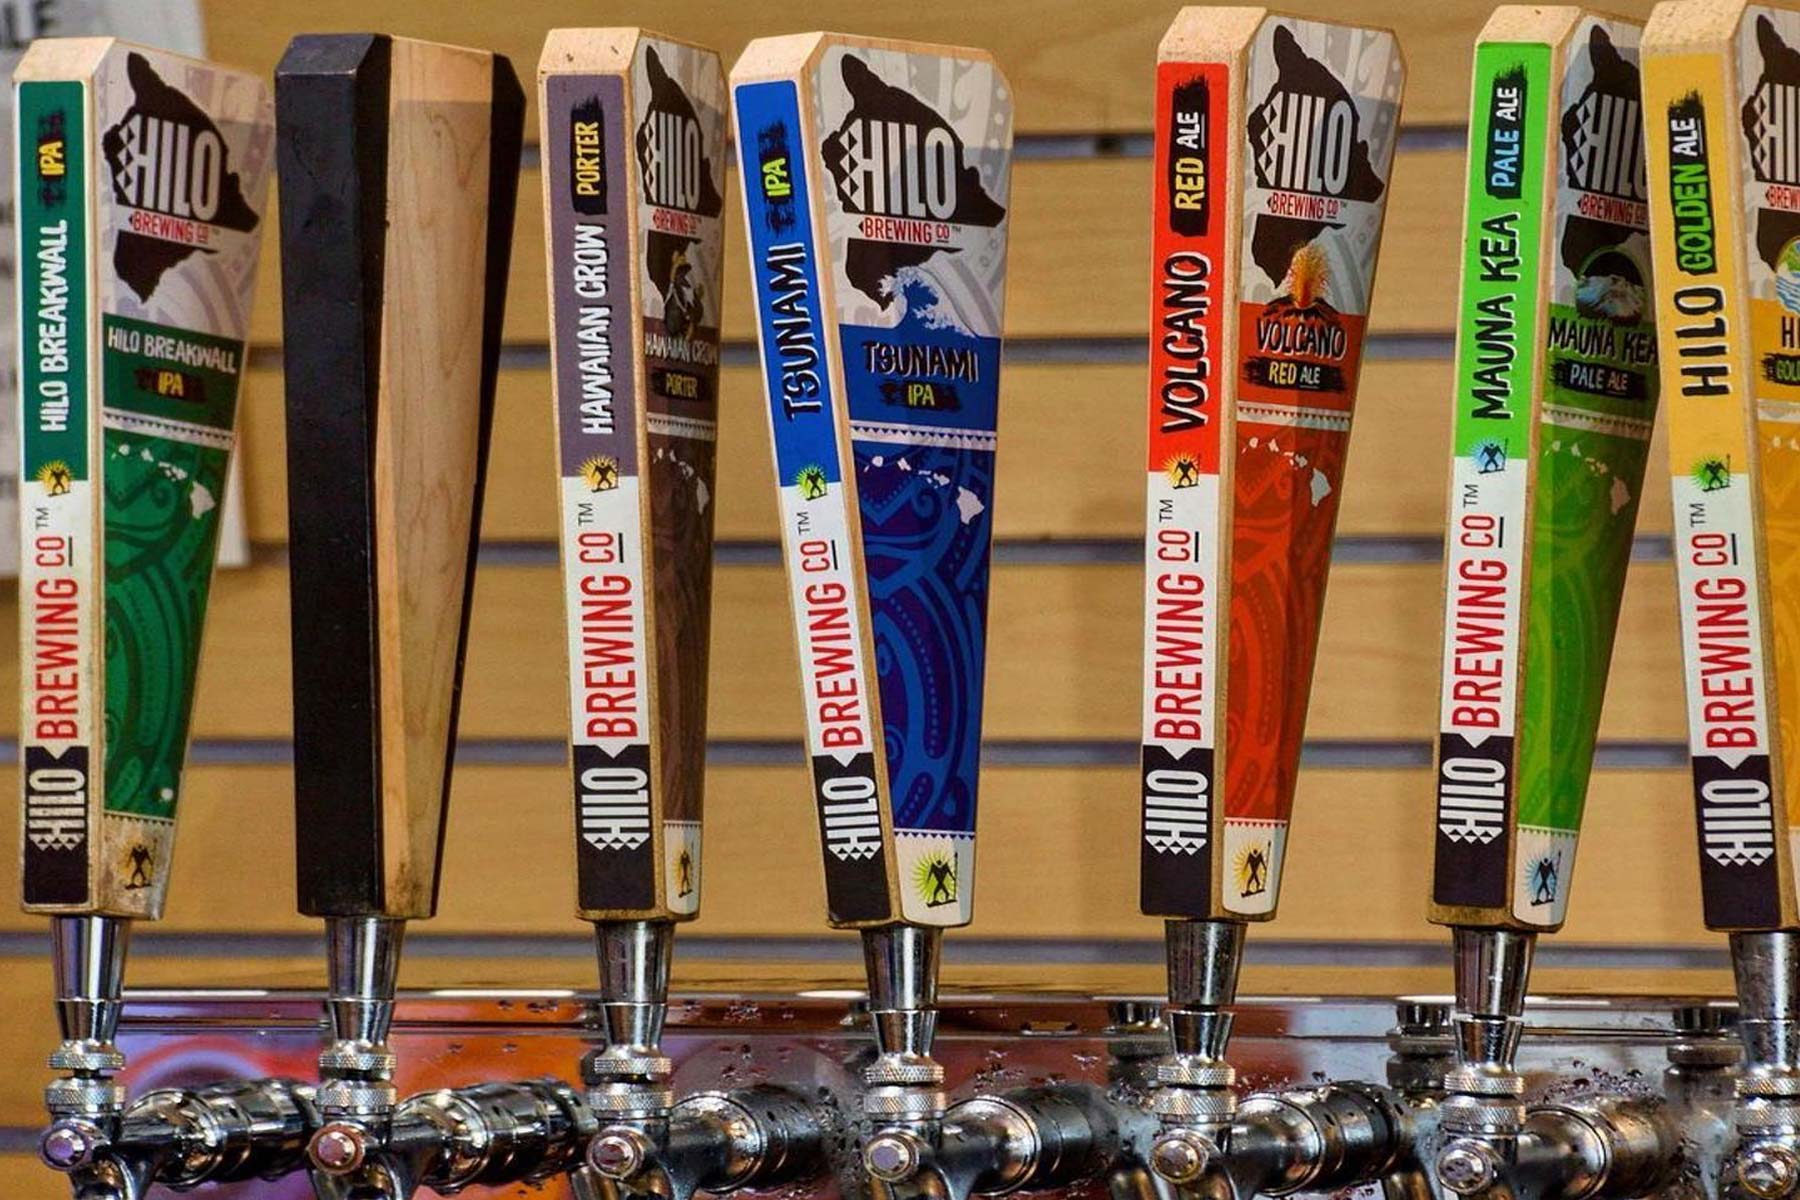 Tap Handles for Hilo Brewing